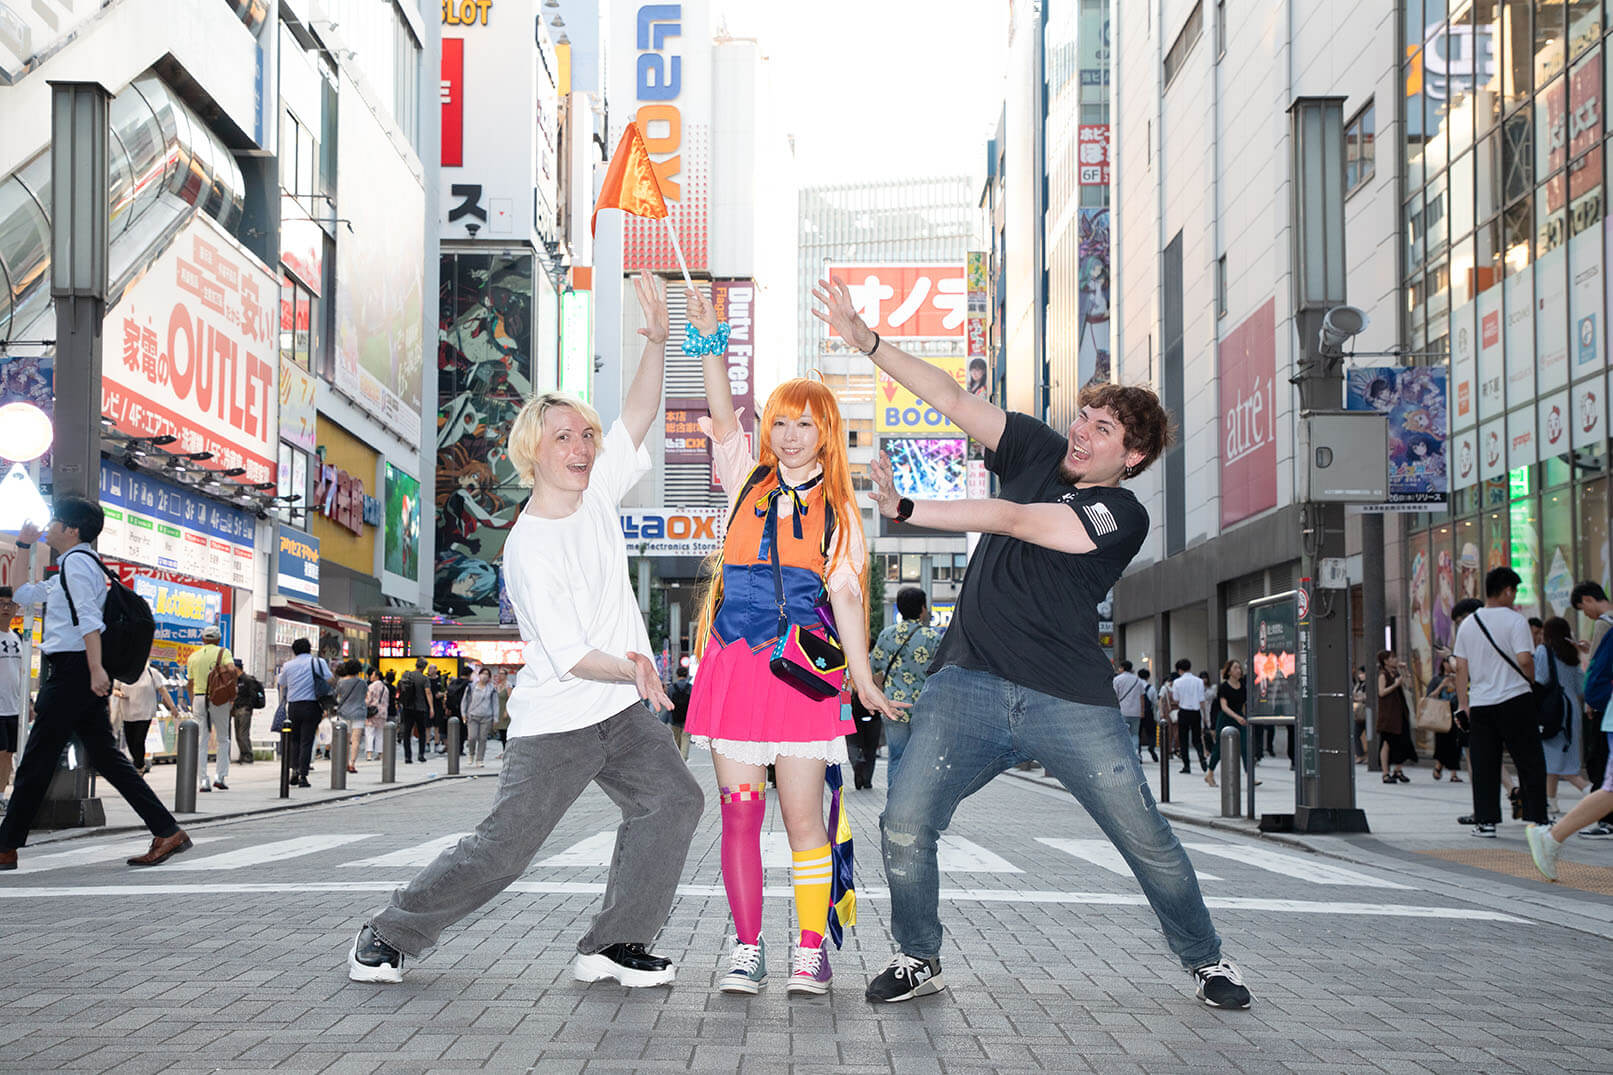 DNP and Akihabara Area Tourism Organization to Collaborate with MyAnimeList